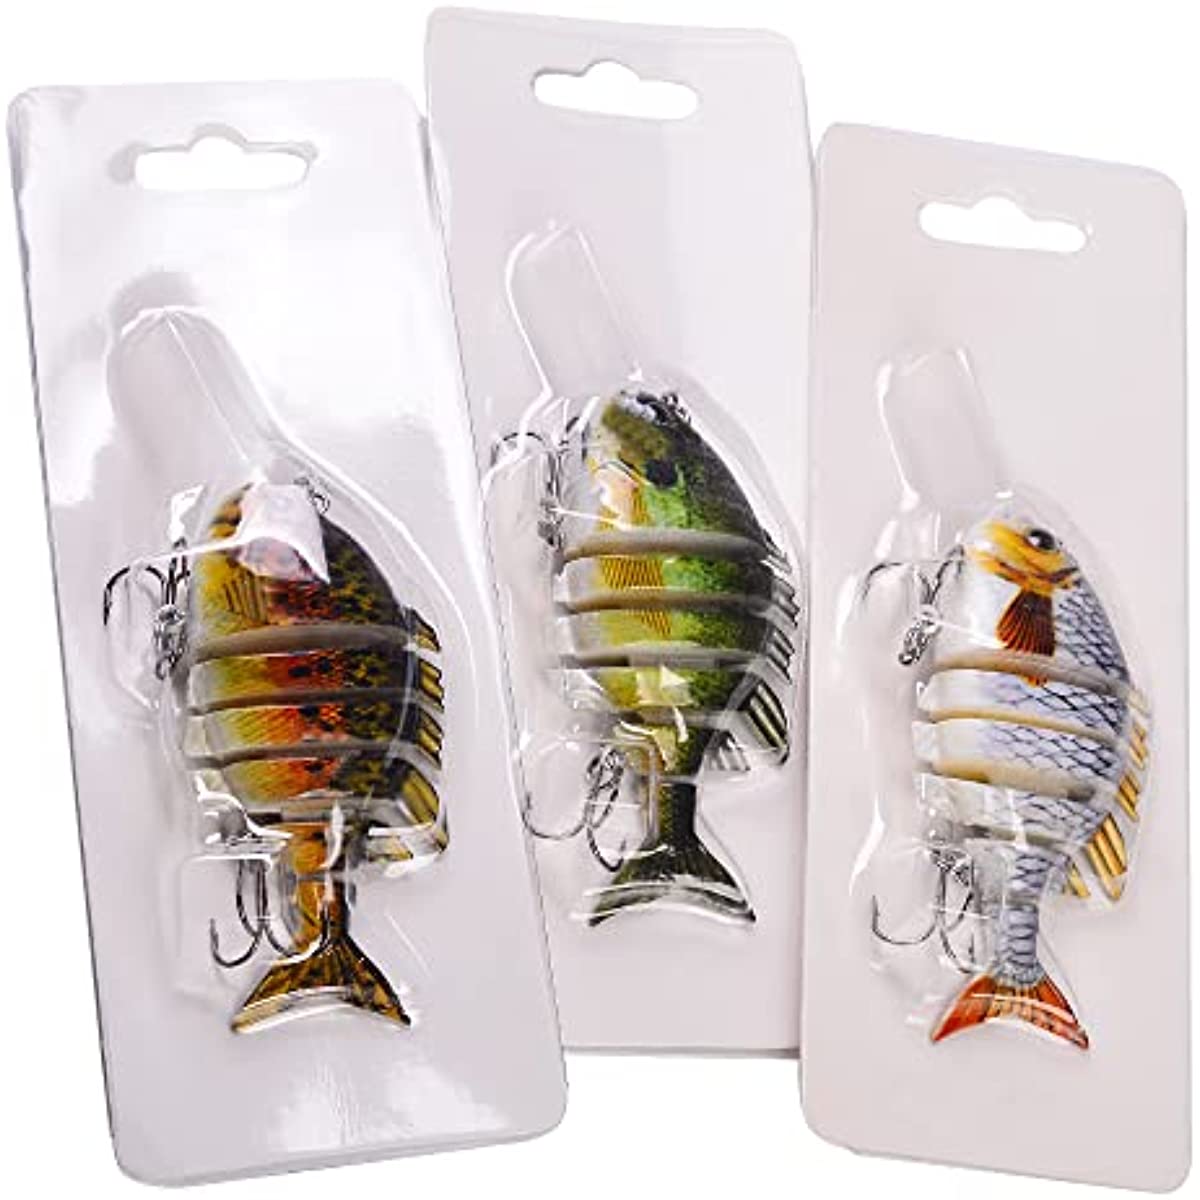 Senvenelec 6pcs Fishing Lures Kits (14g) 3D Eye Fishing Bait, Metal Lures,  Suitable for Upper, Middle and Lower Water Layers.